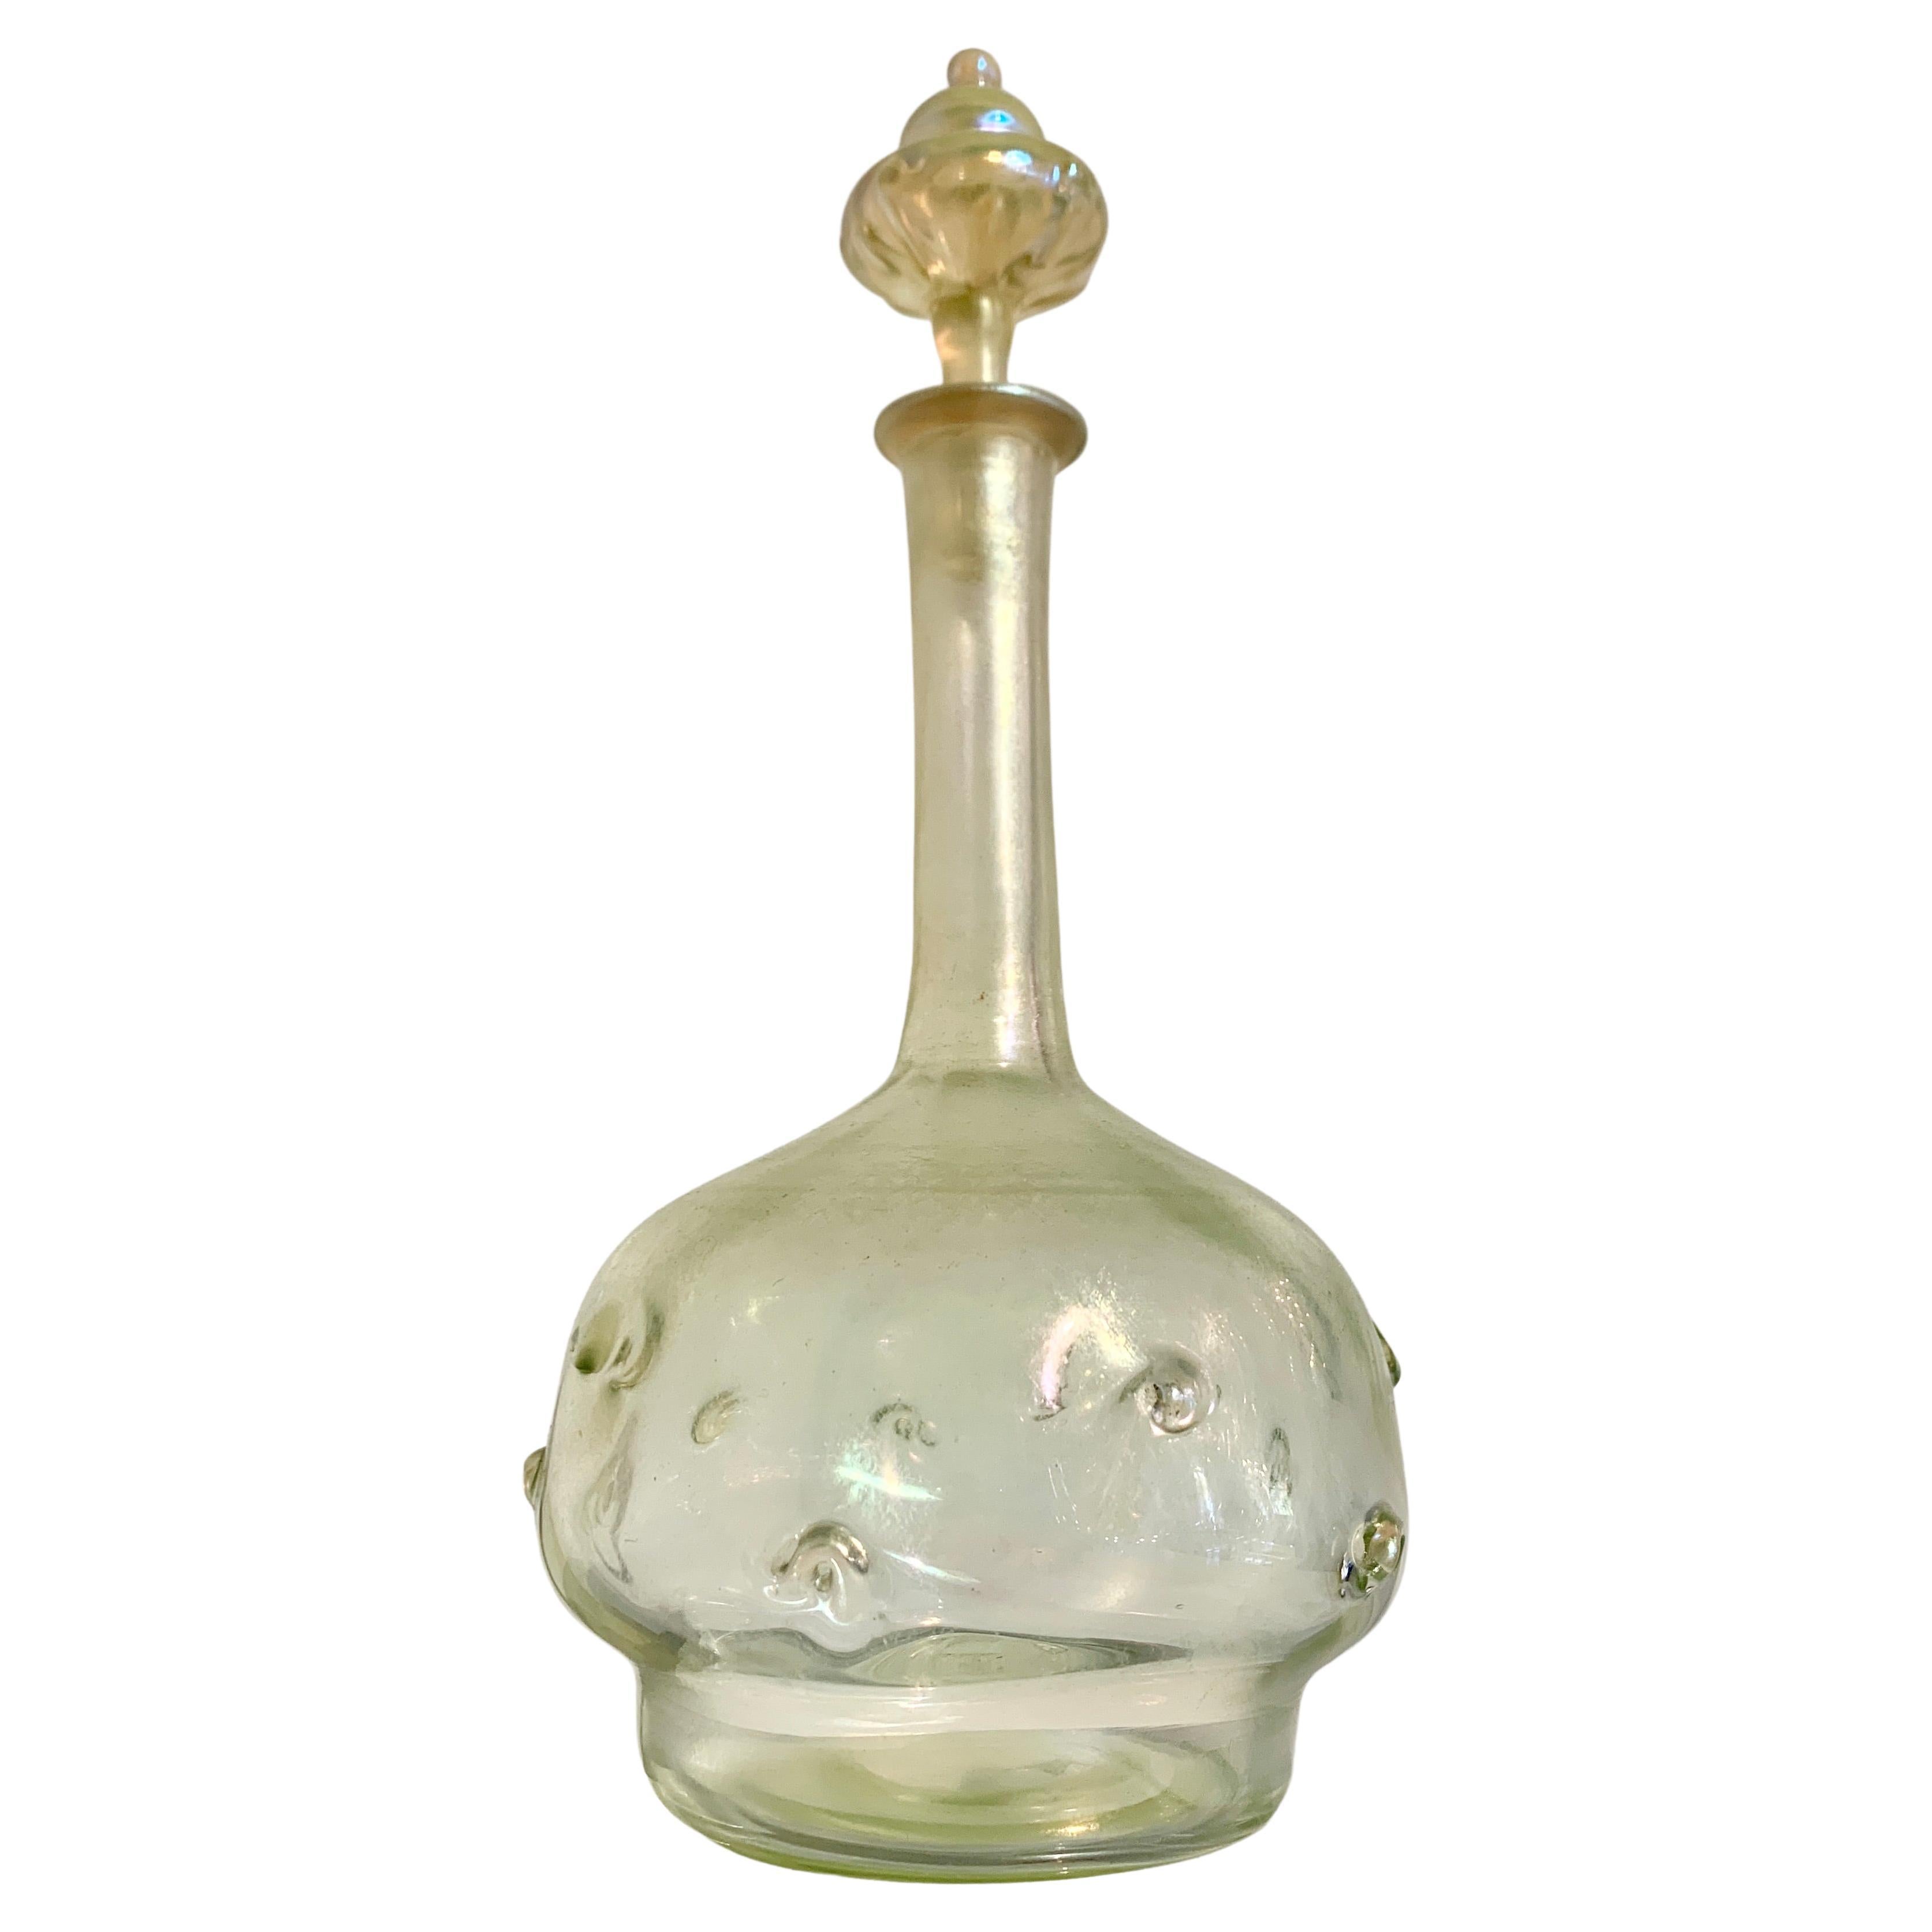 Tiffany Studios Favrille Glass Pigtail Prunt Decanter, Early 20th Century, USA For Sale